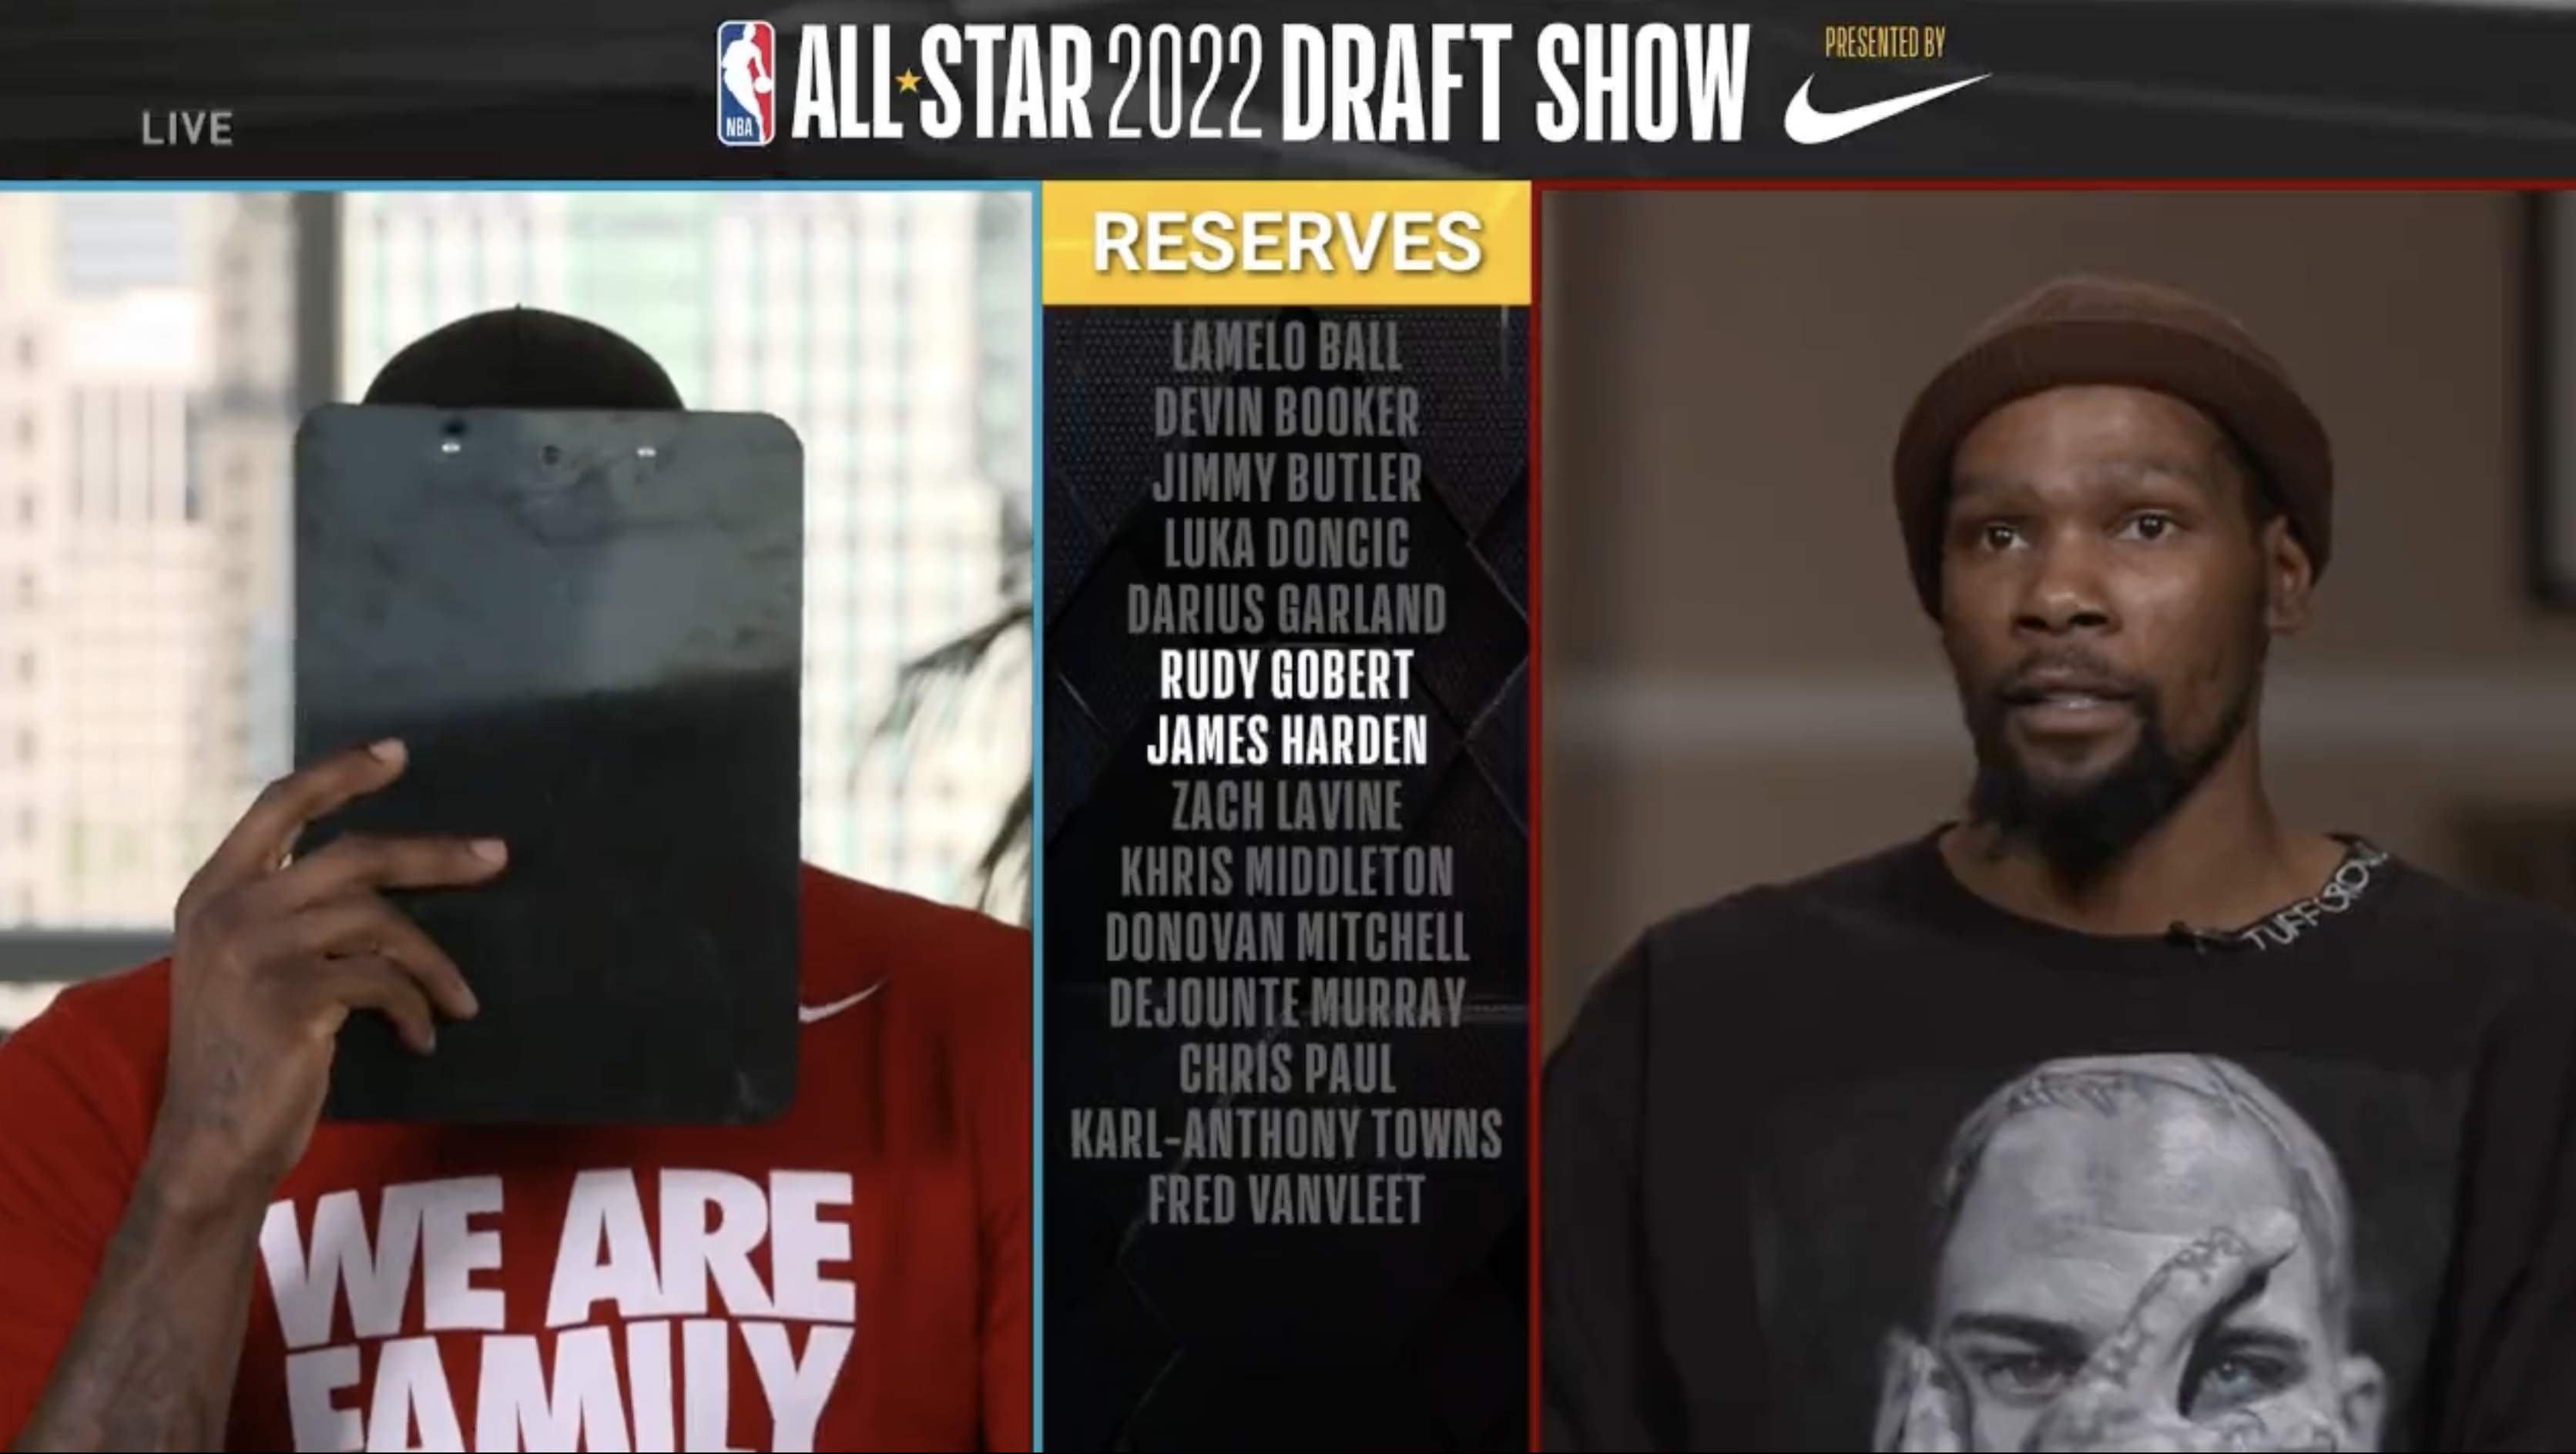 Kevin Durant making his draft pick for the NBA All-Star teams along with fellow team captain LeBron James.